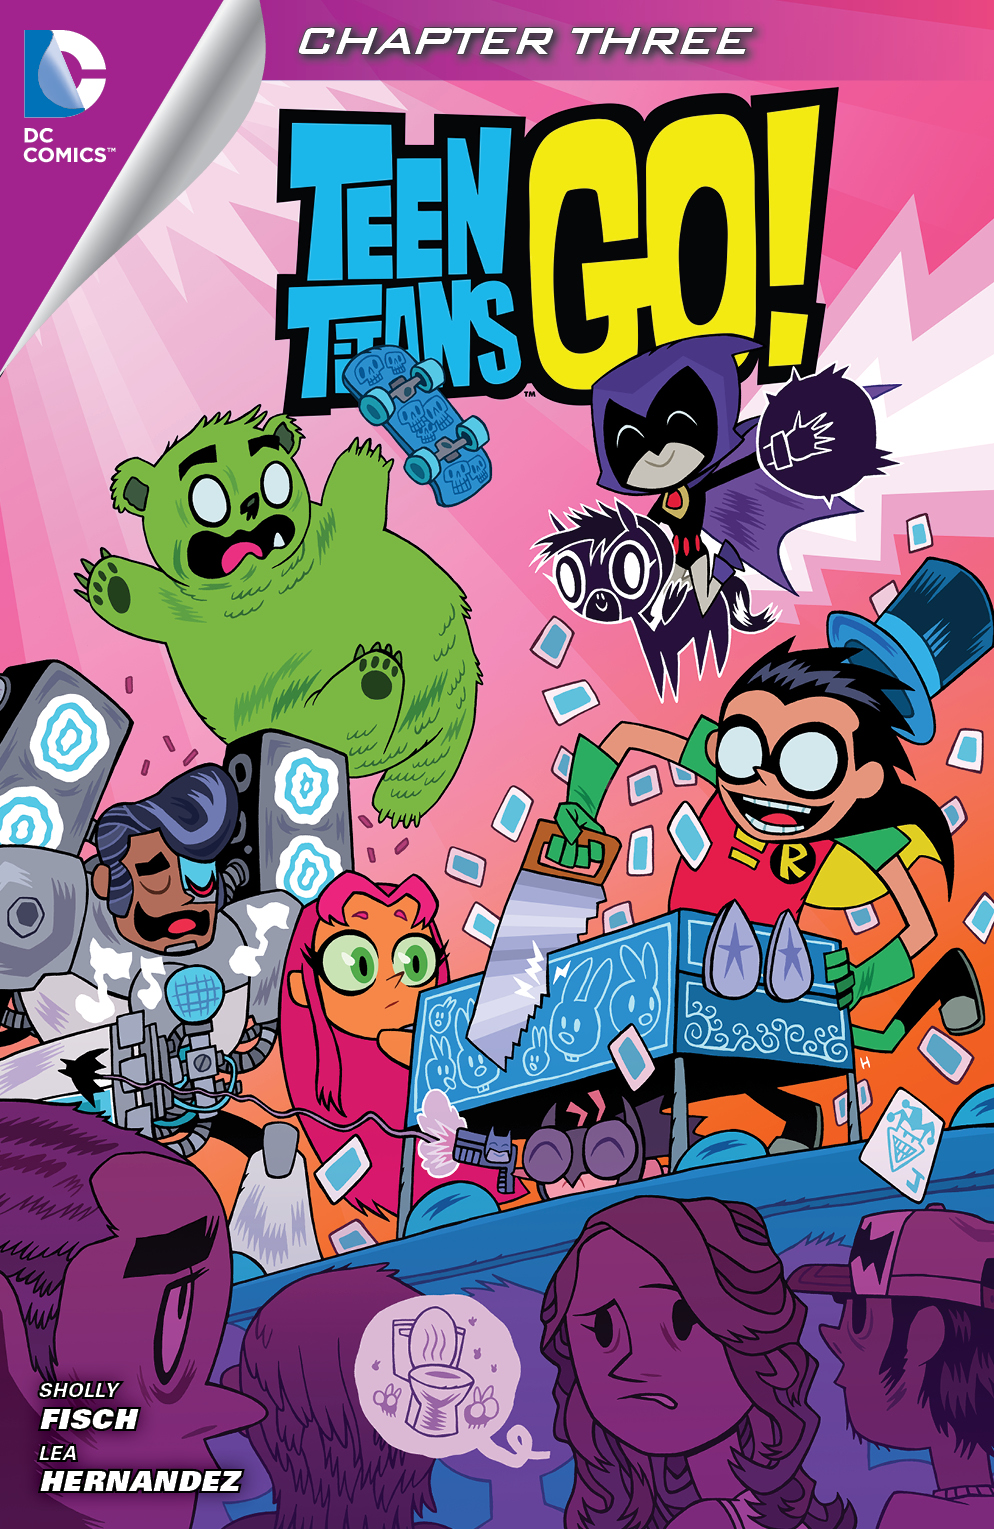 Teen Titans Go! (2013-) #3 preview images